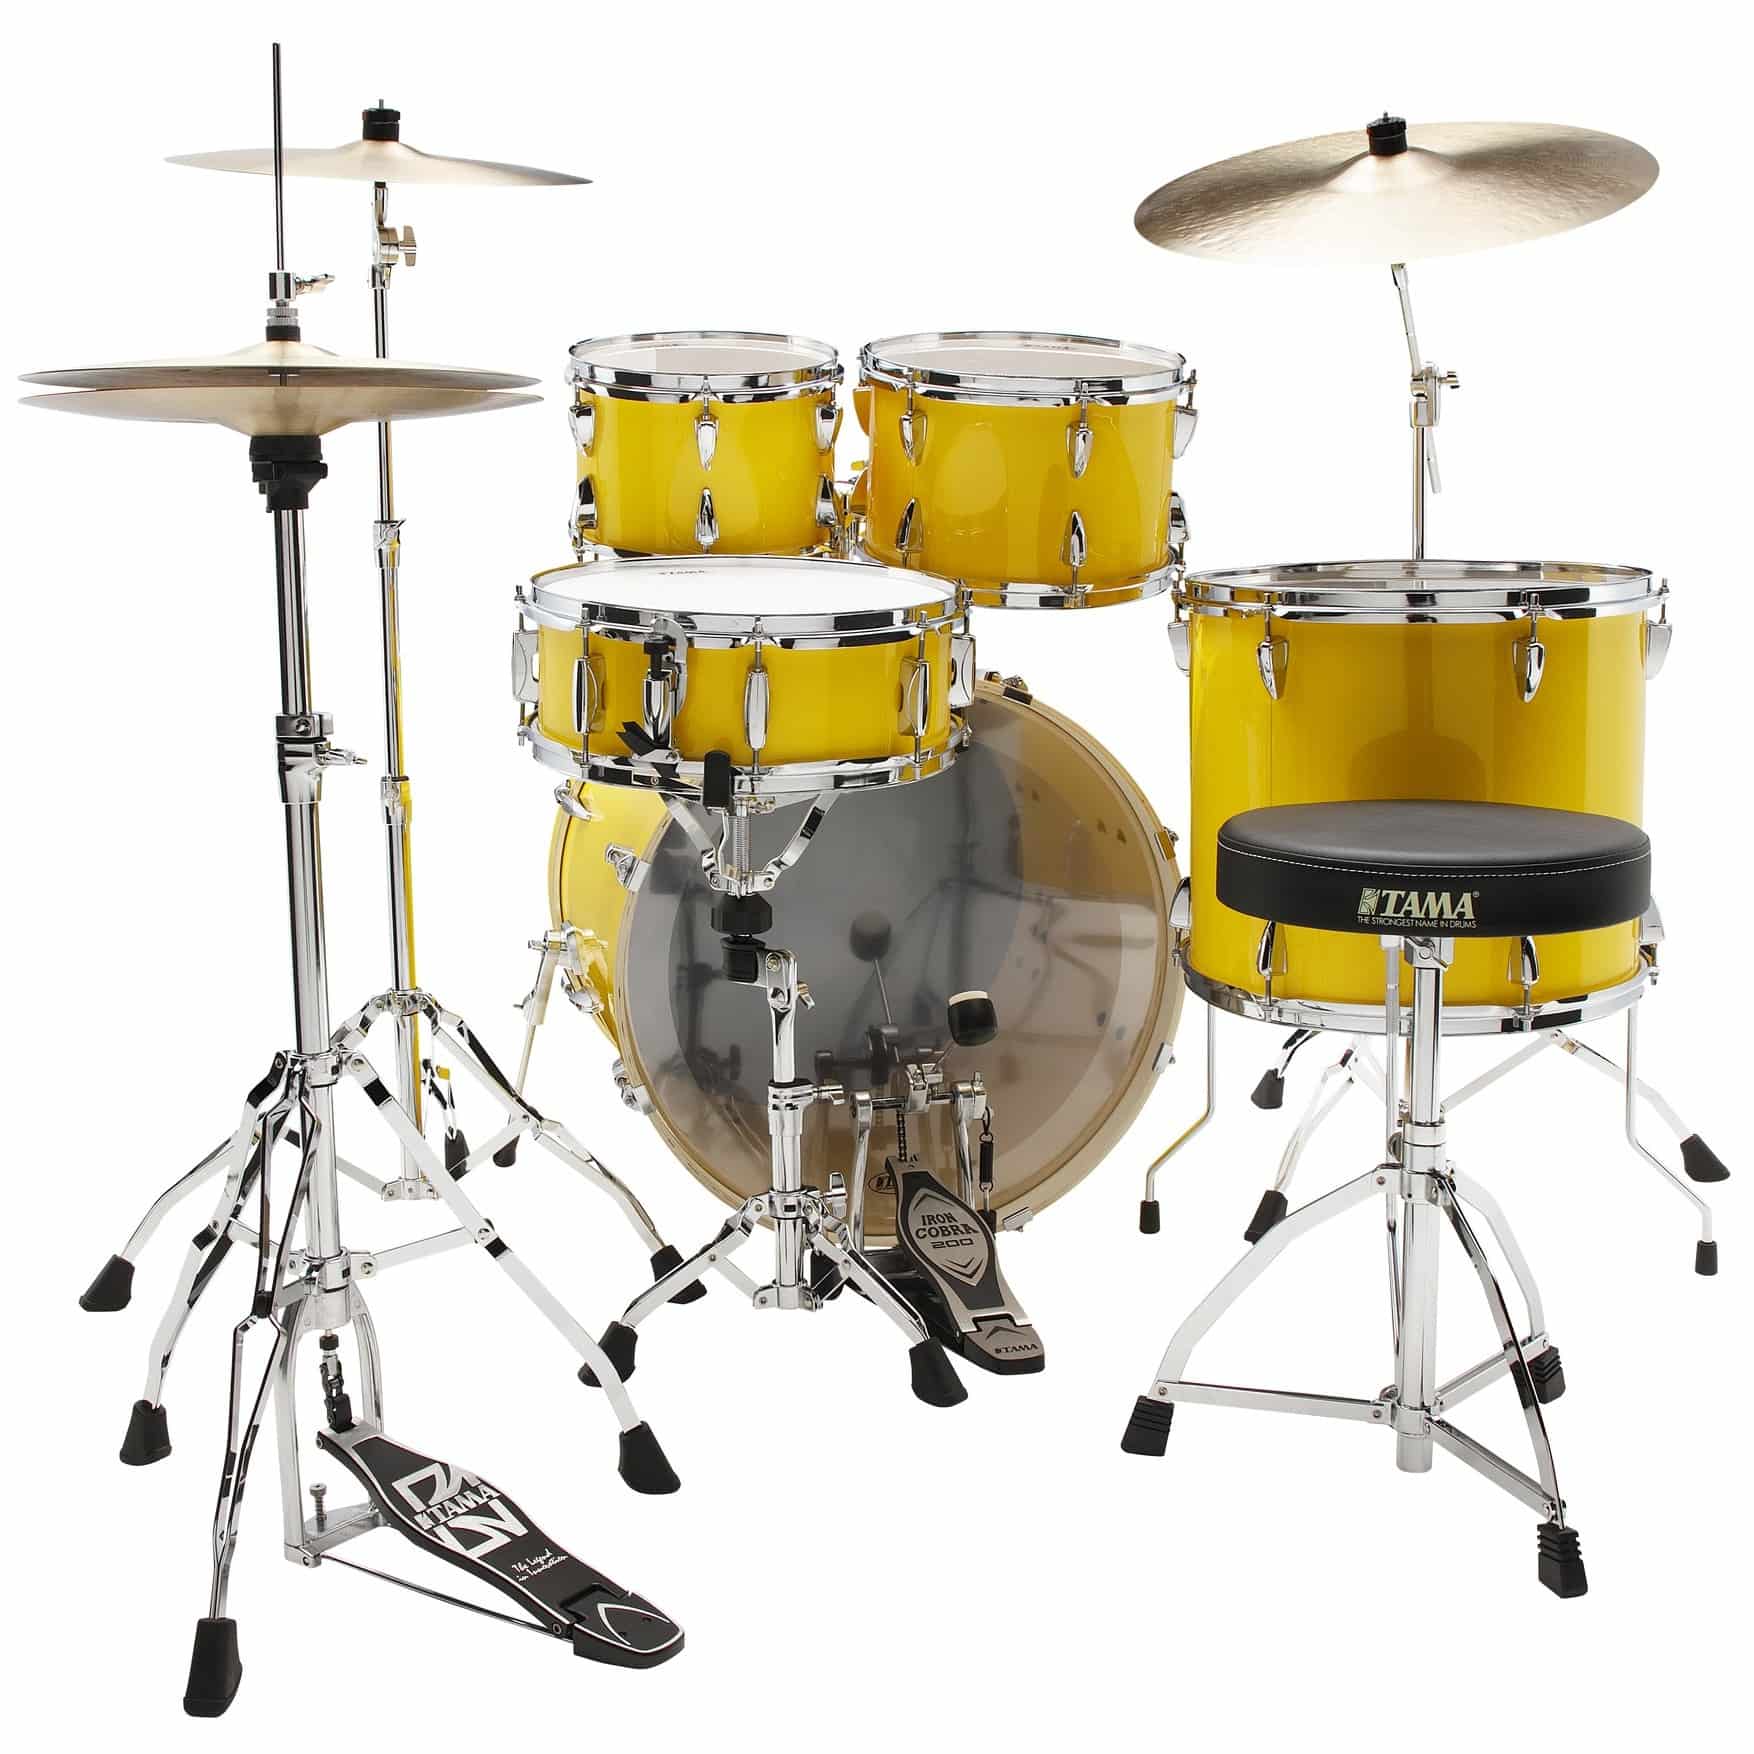 Tama IP52H6W-ELY Imperialstar Drumset 5 teilig - Electric Yellow / Chrom HW + MEINL Cymbals HCS Bronze 5